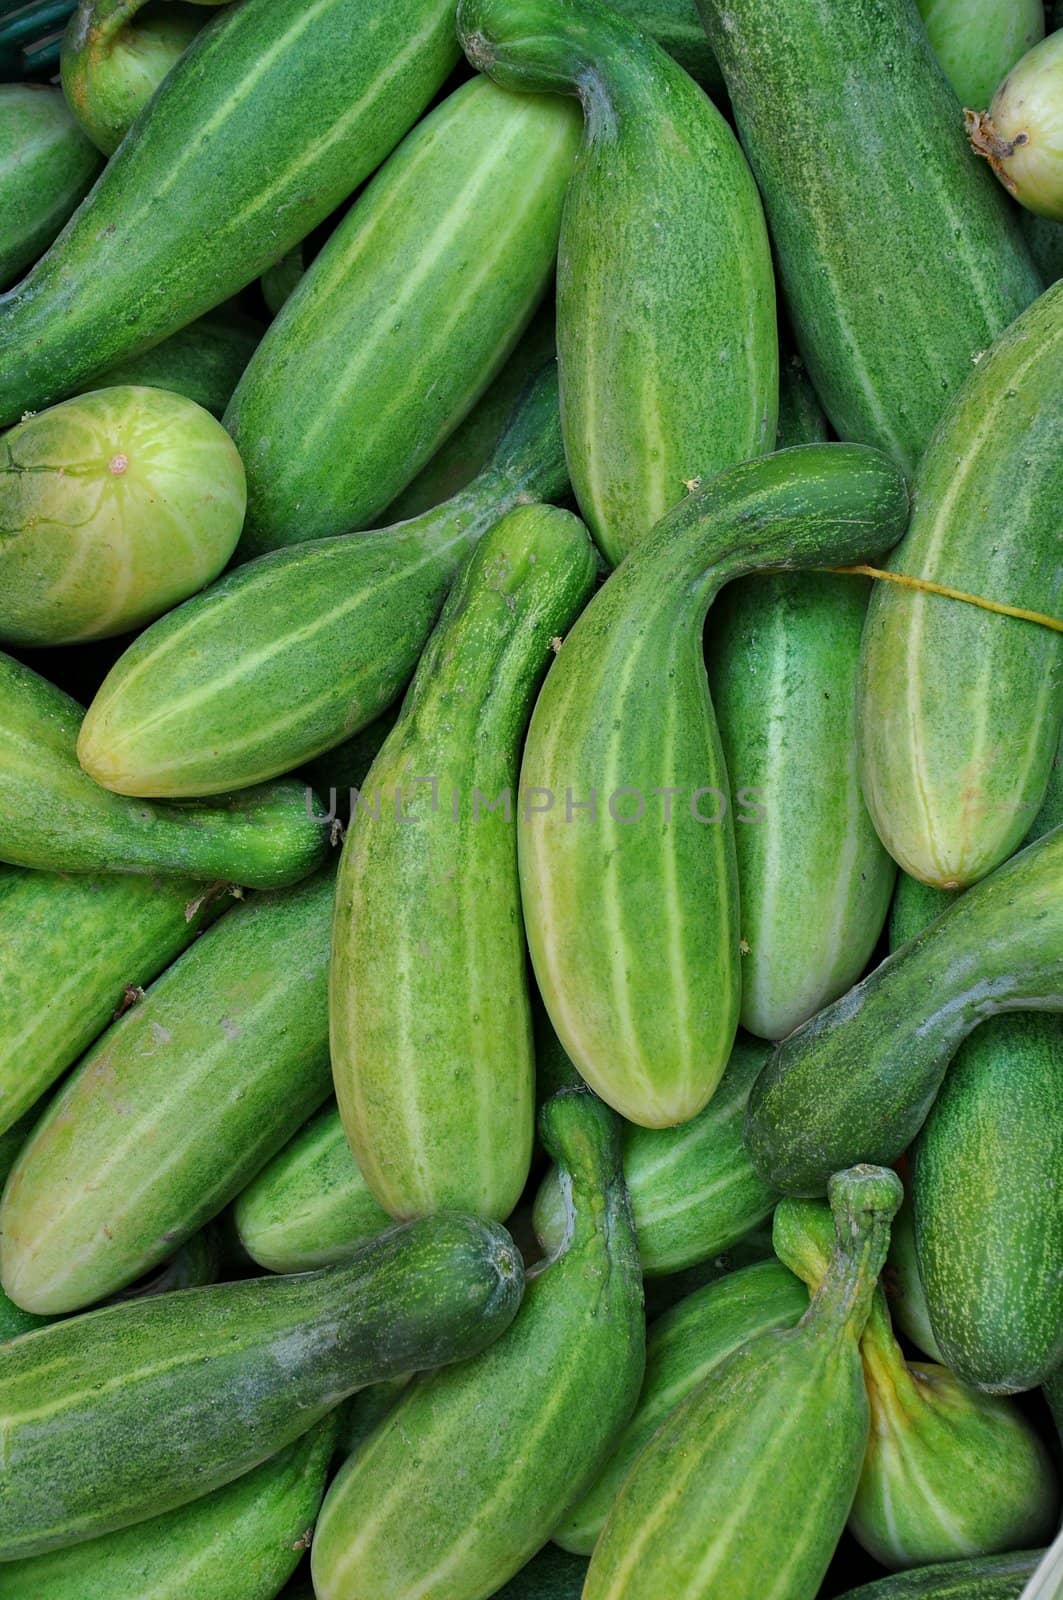 Cucumbers by phanlop88